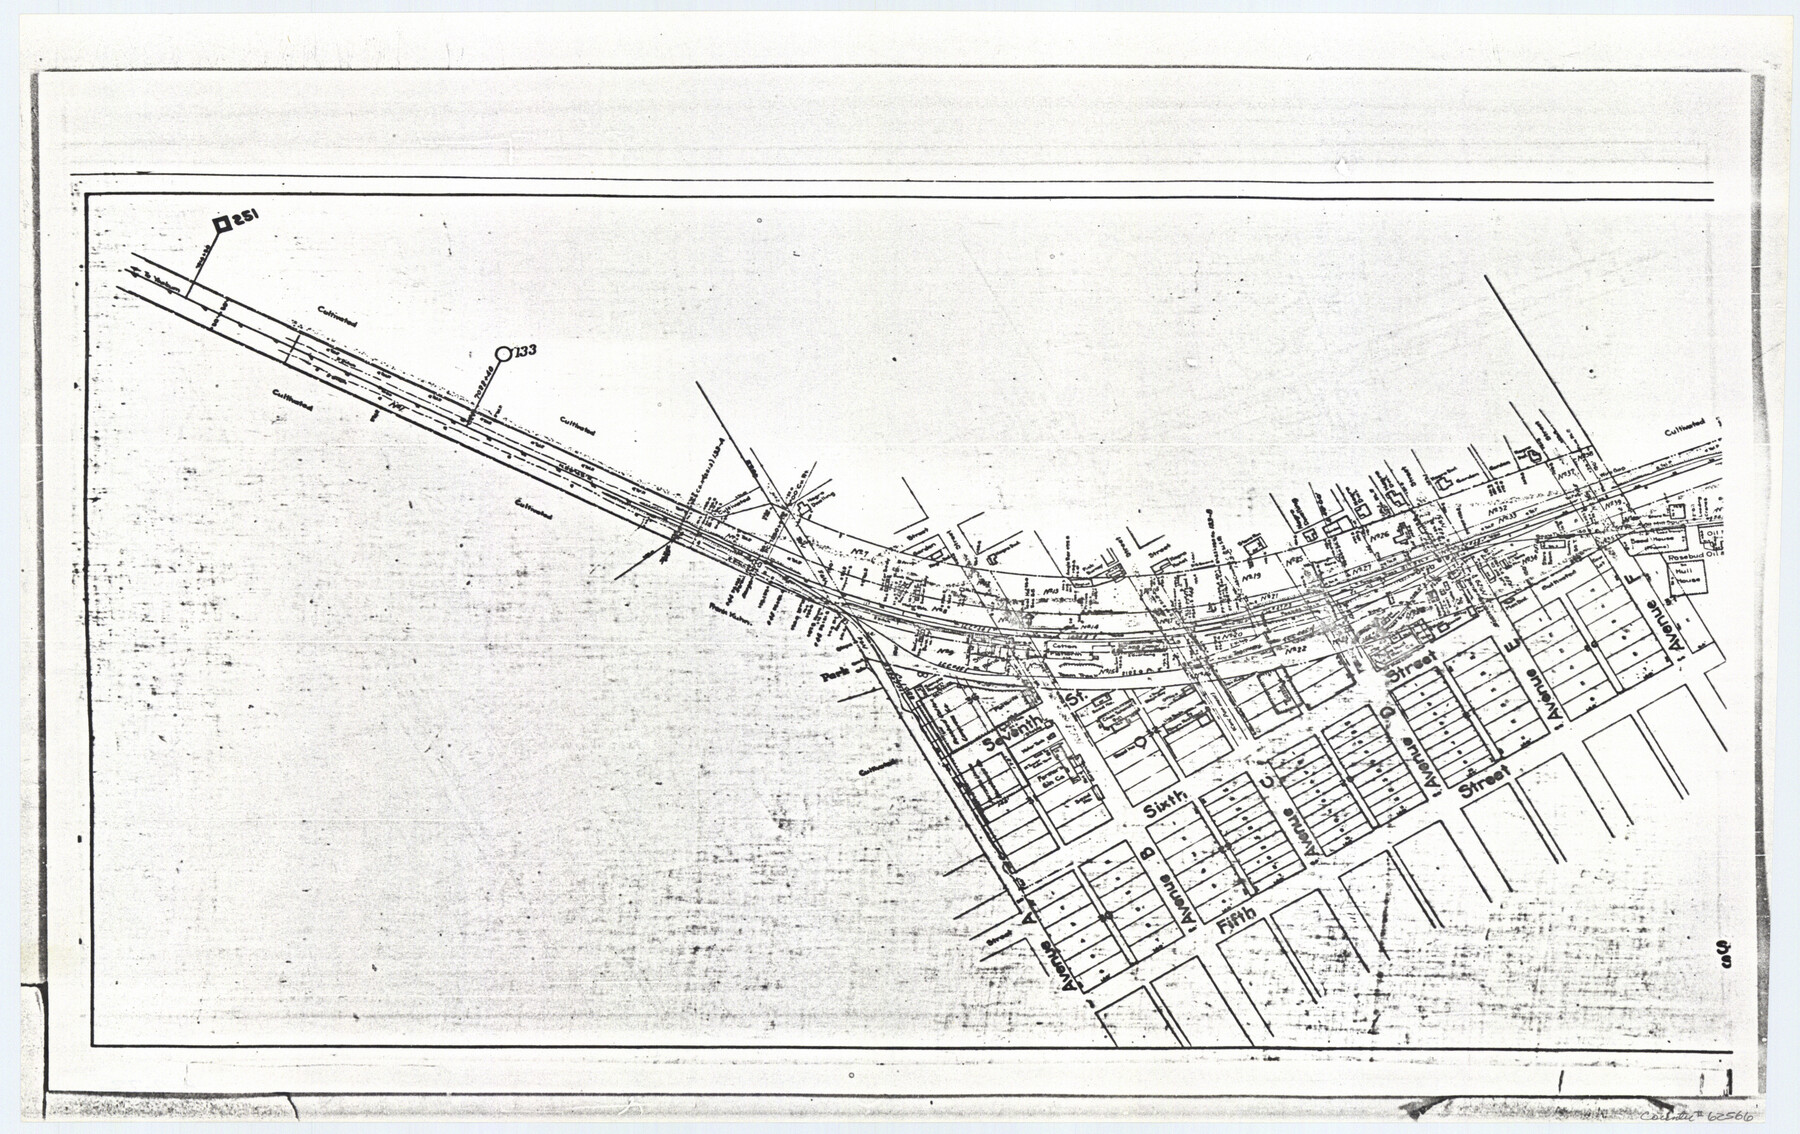 62566, [Rosebud Station Map - Tracks and Structures - Lands, San Antonio and Aransas Pass Railway Co.], General Map Collection